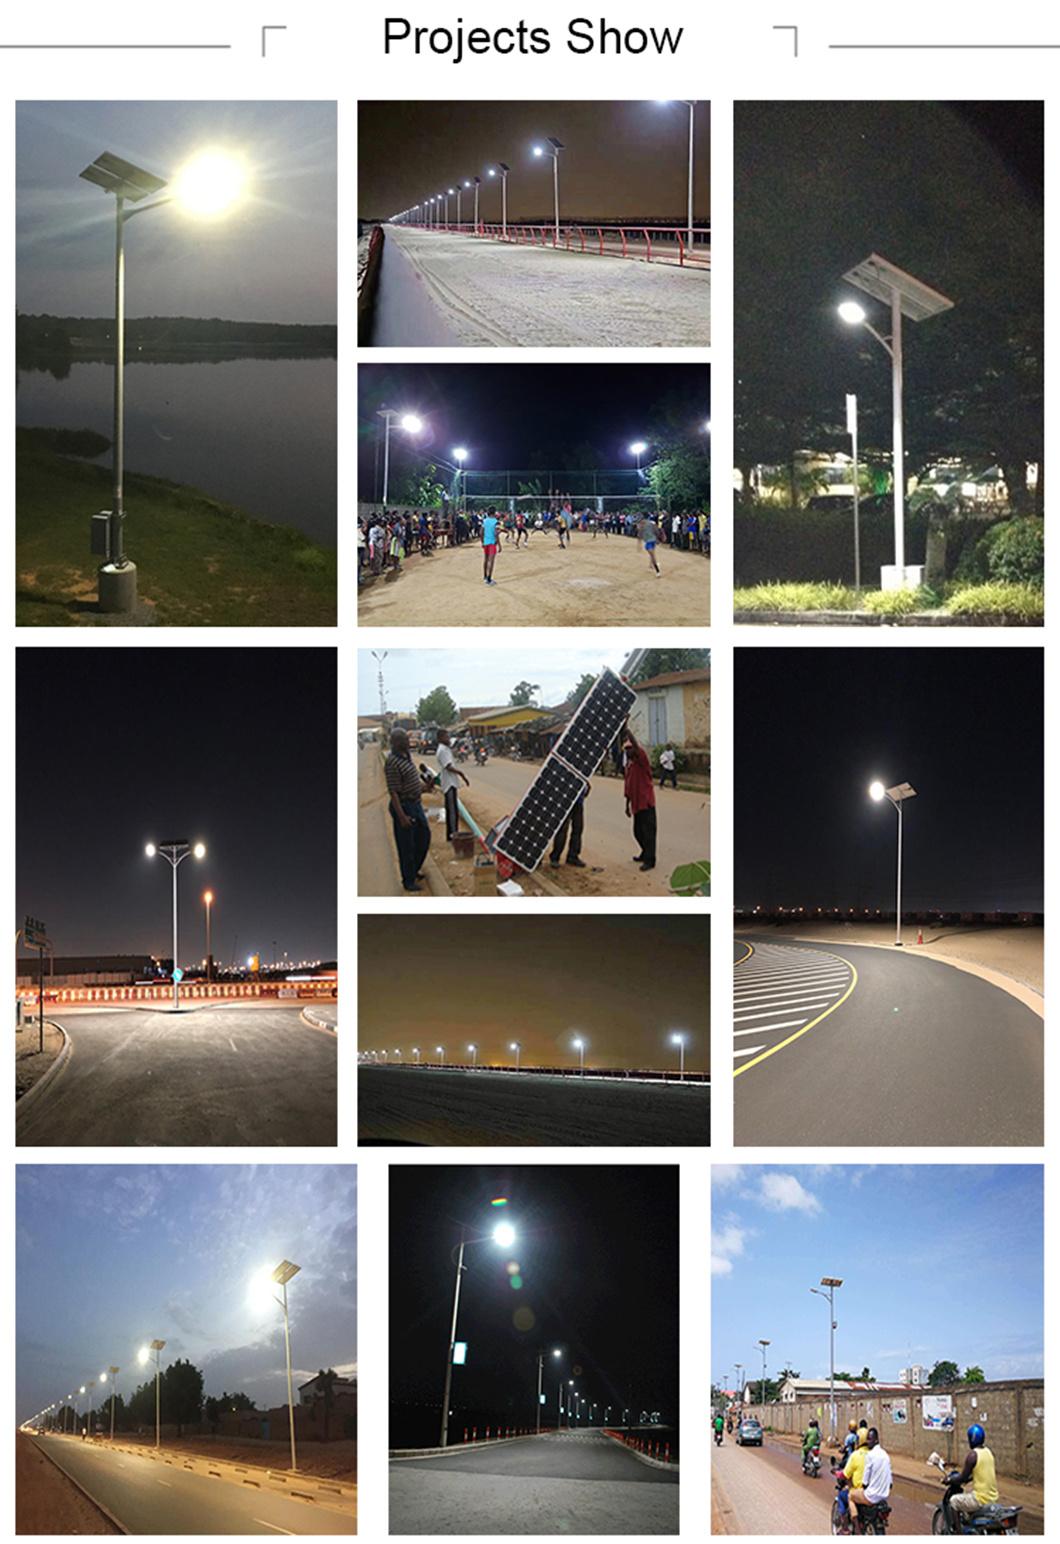 Best Quality Waterproof Outdoor IP66 Aluminum SMD 40W Lithium Battery LED Solar Street Light